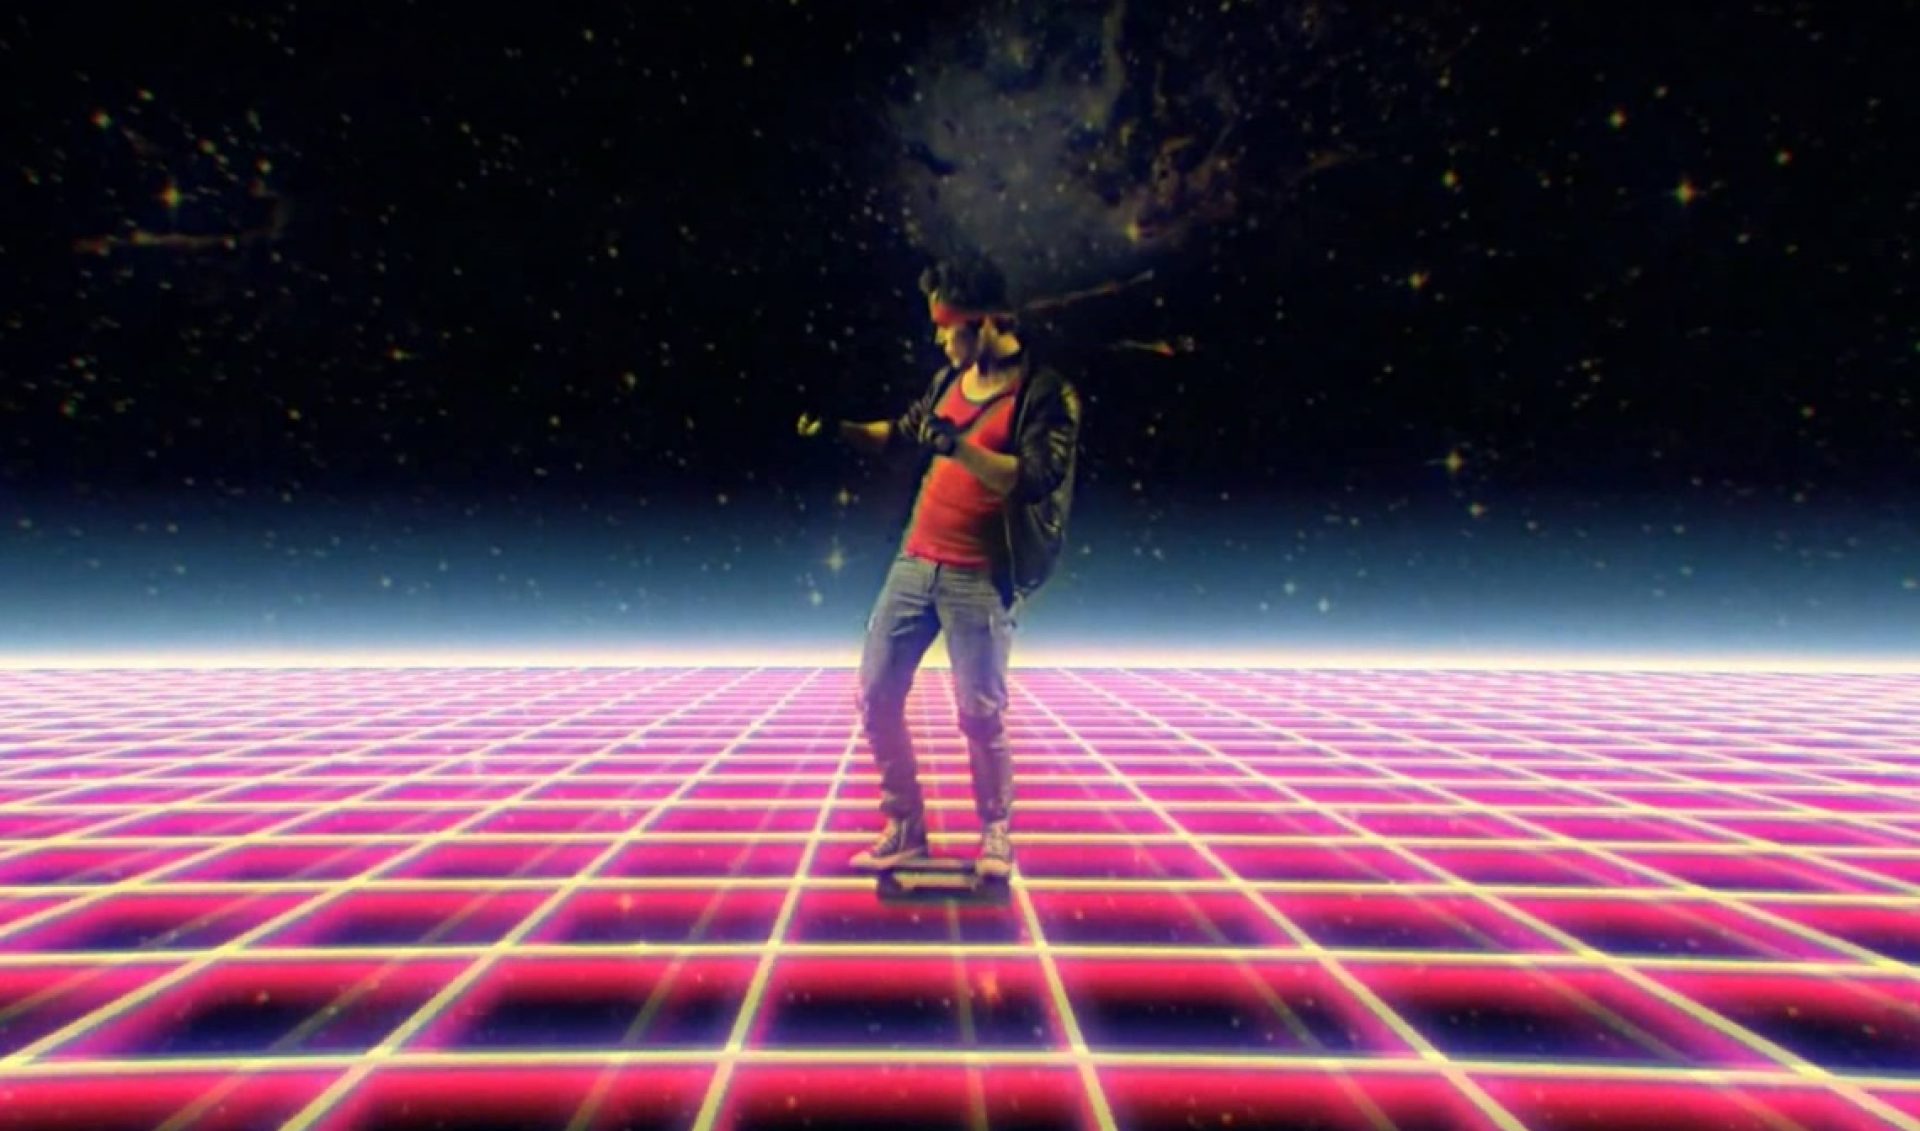 ‘Kung Fury’ Has Big First Day On YouTube With Three Million Views